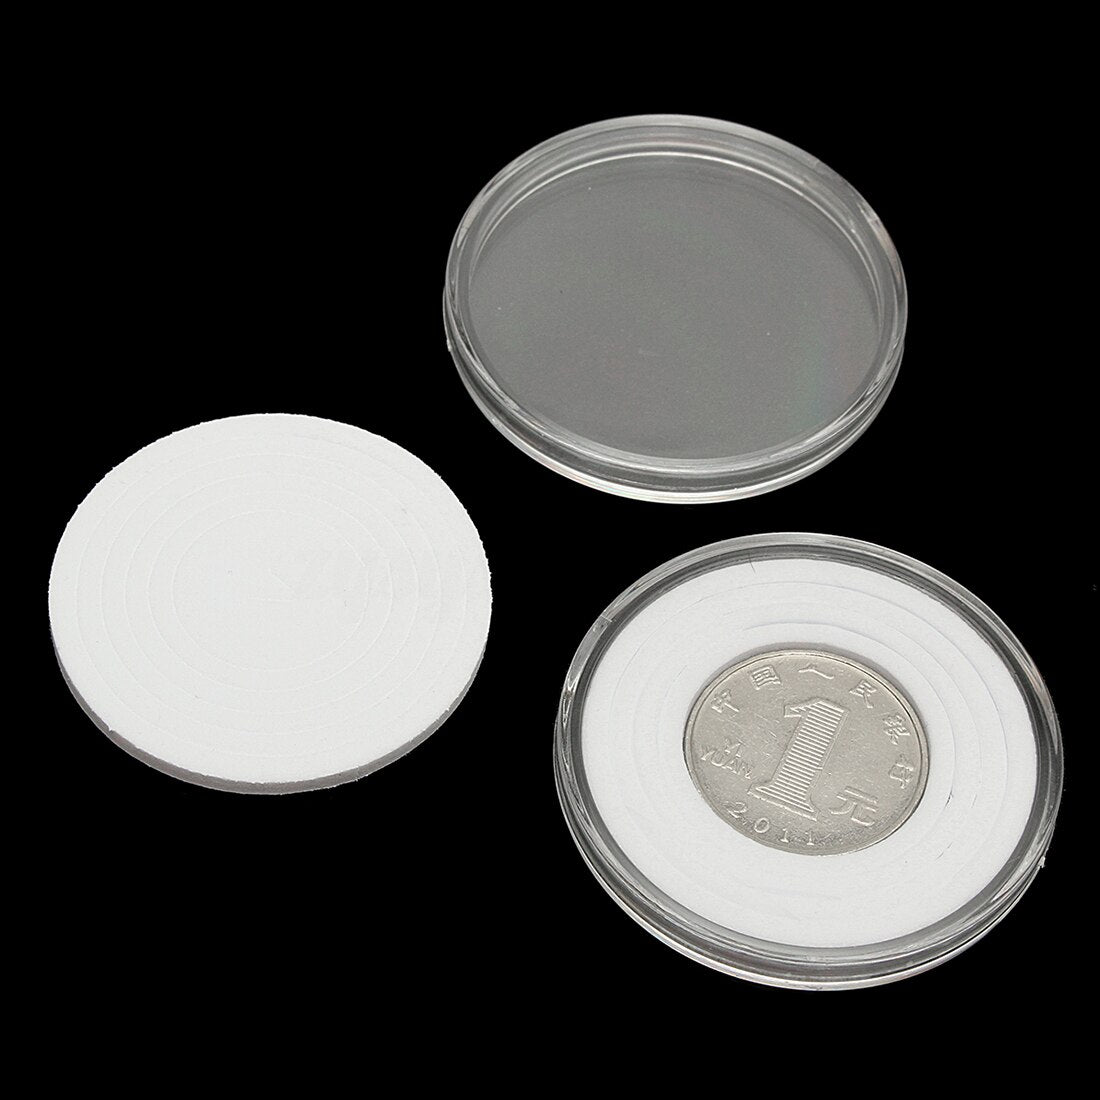 20 pcs 46mm Coin Cases Holder Applied Clear Round Storage Box - ebowsos